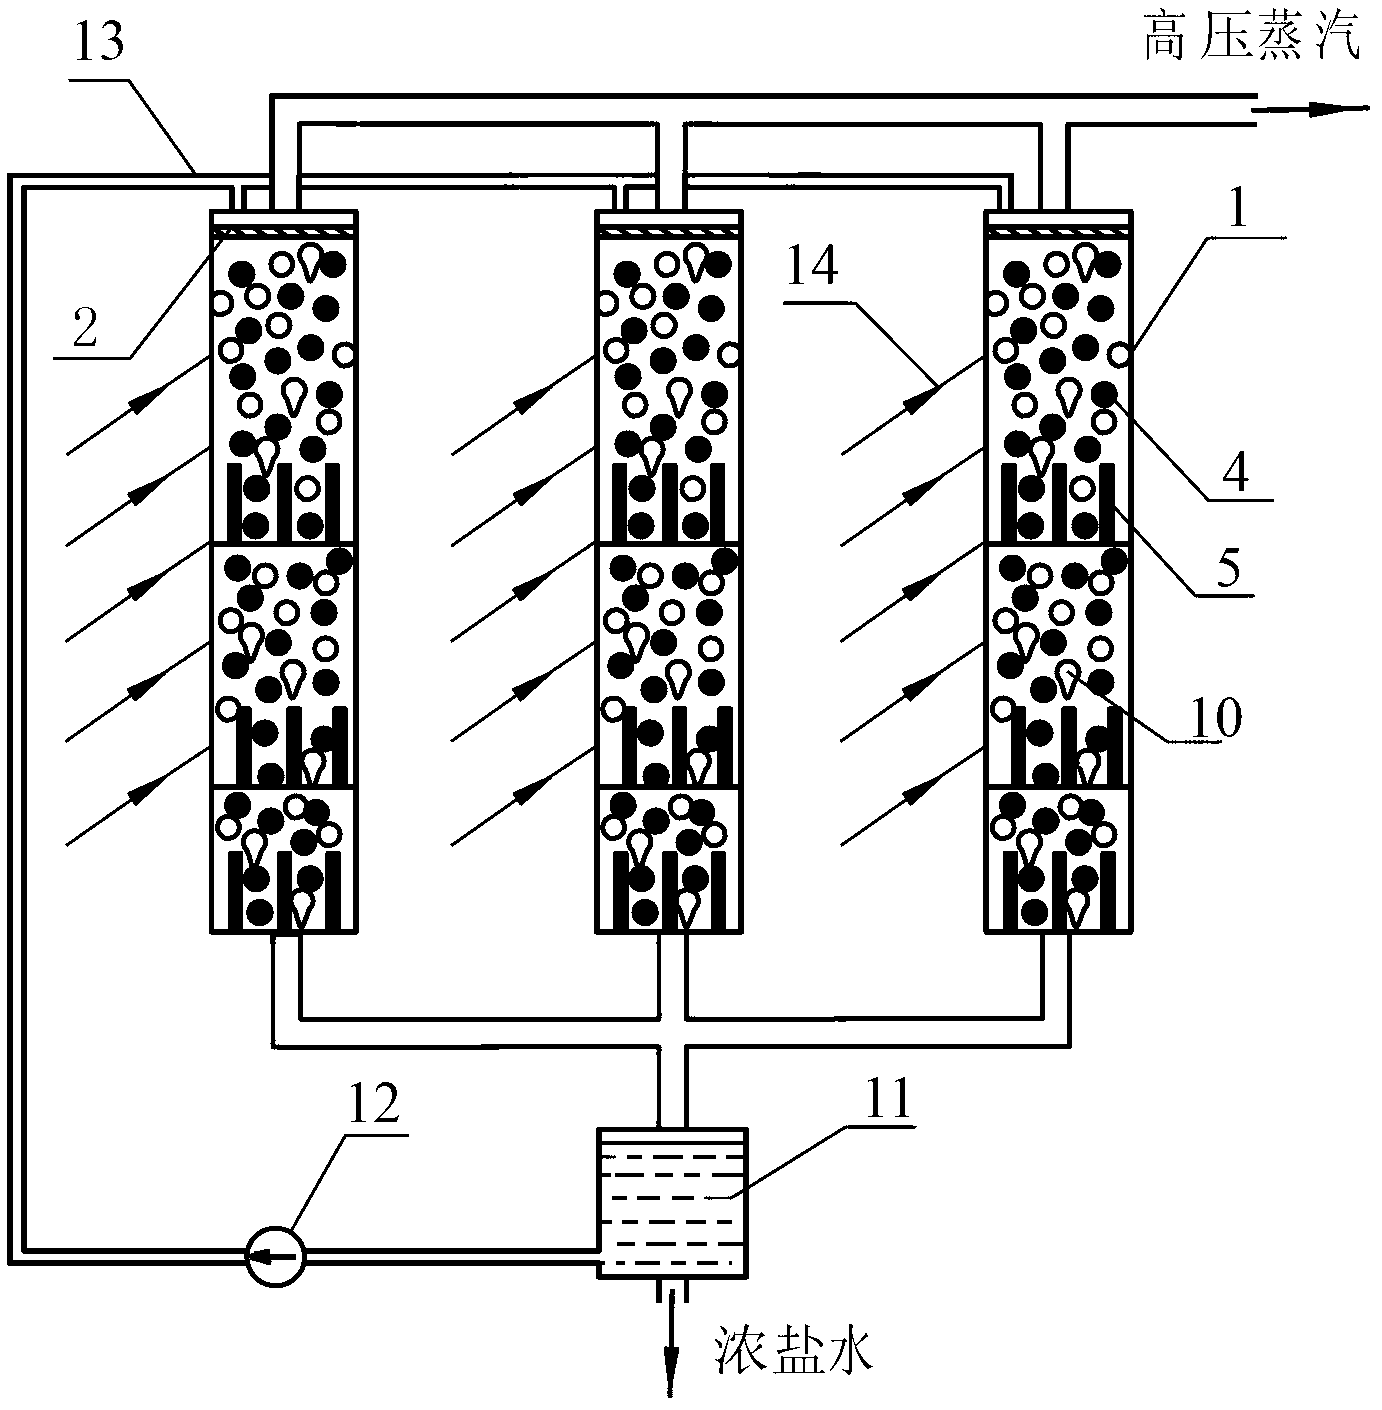 Seawater evaporator for light collecting solar seawater desalination device